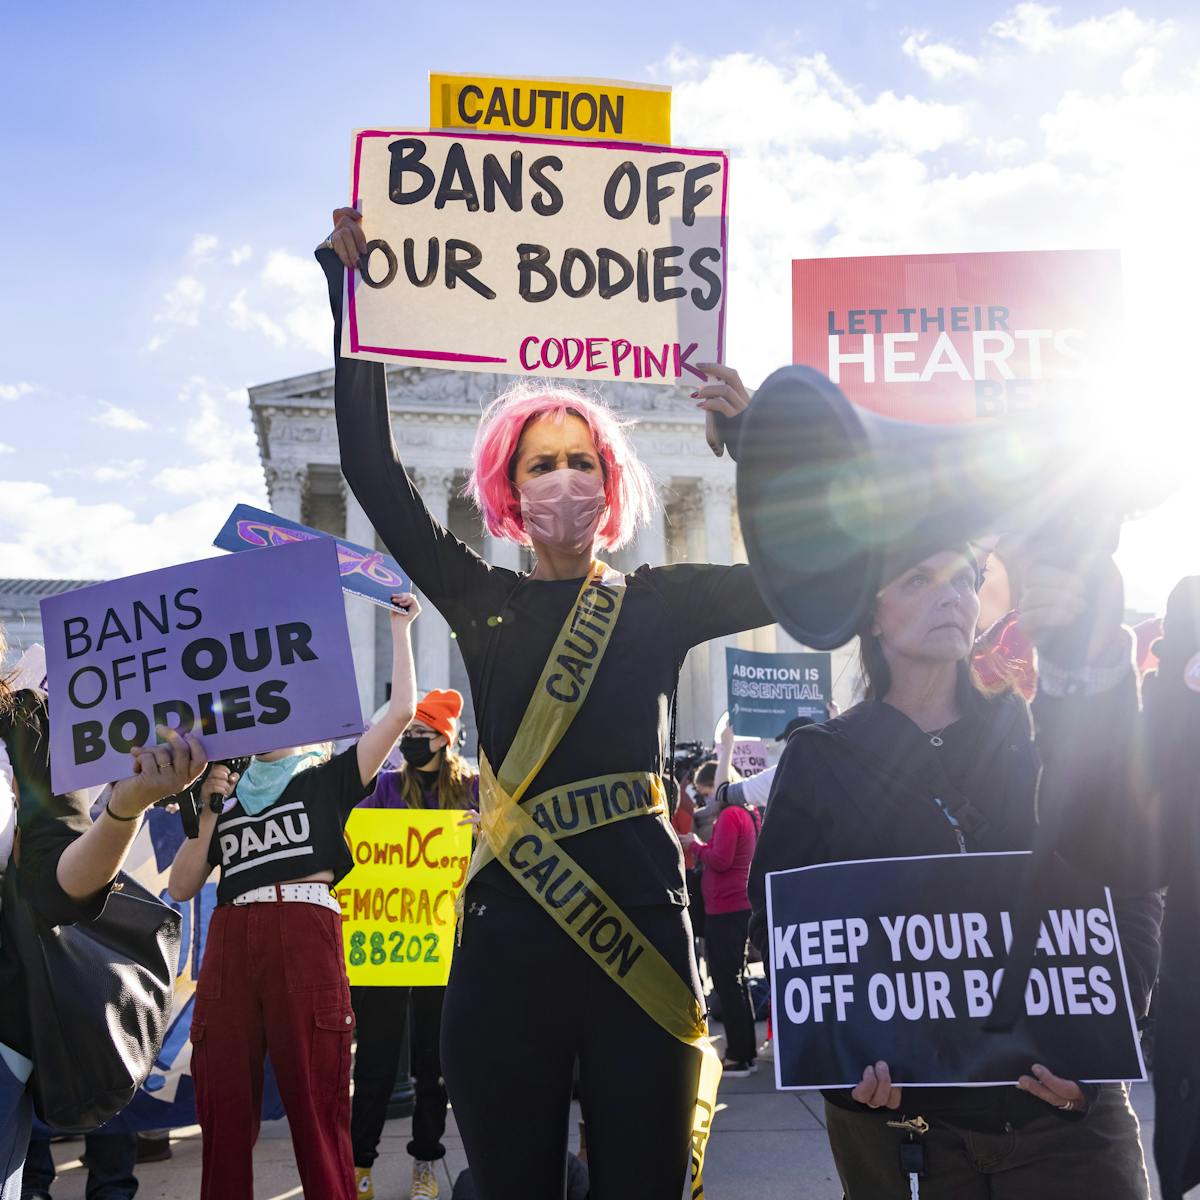 US abortion bans back before the Supreme Court – but globally more countries  are liberalising access than restricting it. Podcast